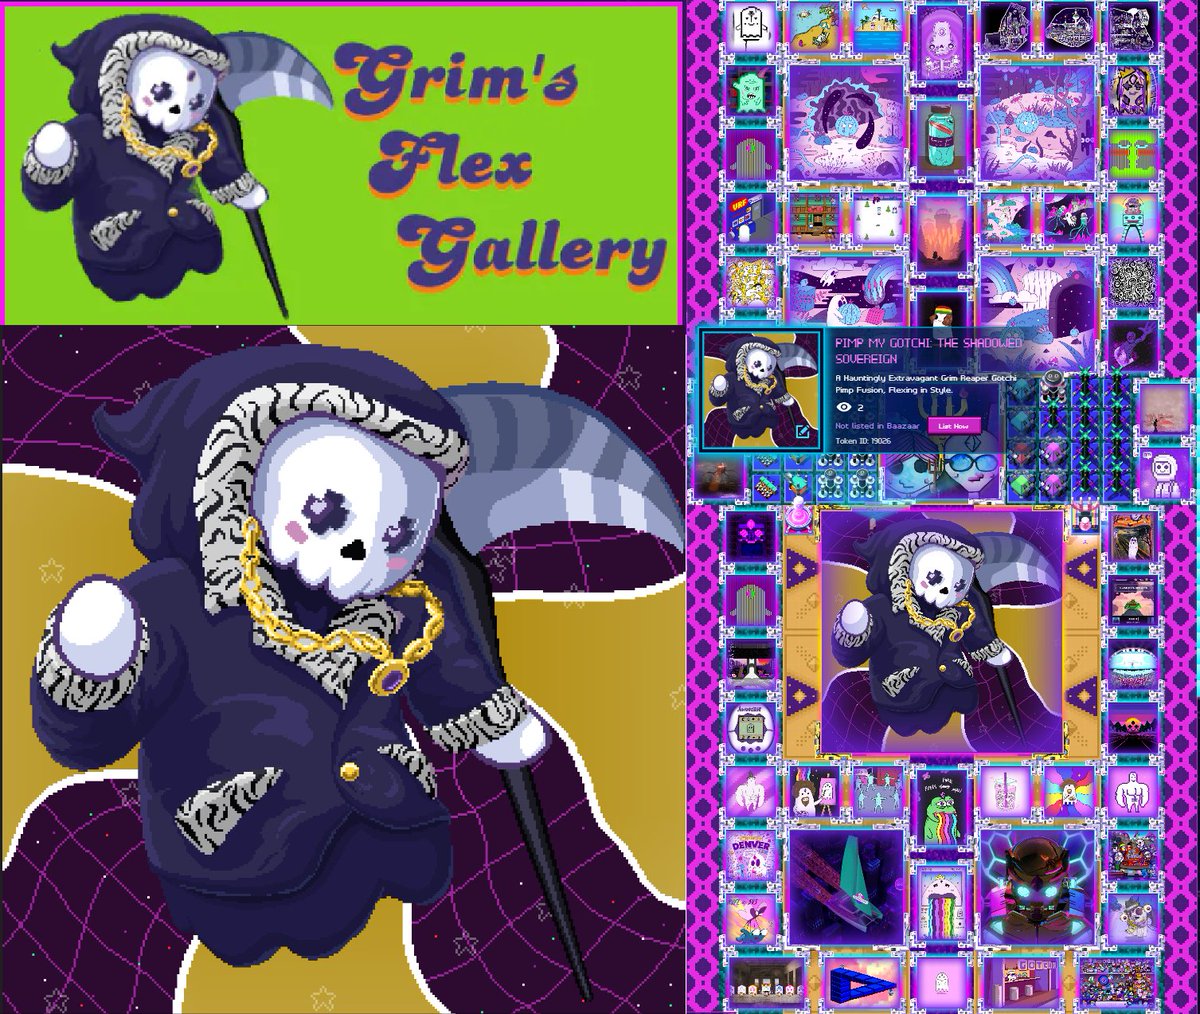 Commissioned an artist, burnt a Fake Gotchi Card, selfishly minted 1/1 NFT for me, and rebranded my gallery. Worth it? Yep! Publishers like me are also eager to team up with talented artists to showcase their creations in the Gotchverse and earn $GHST @FAKEgotchis @aavegotchi